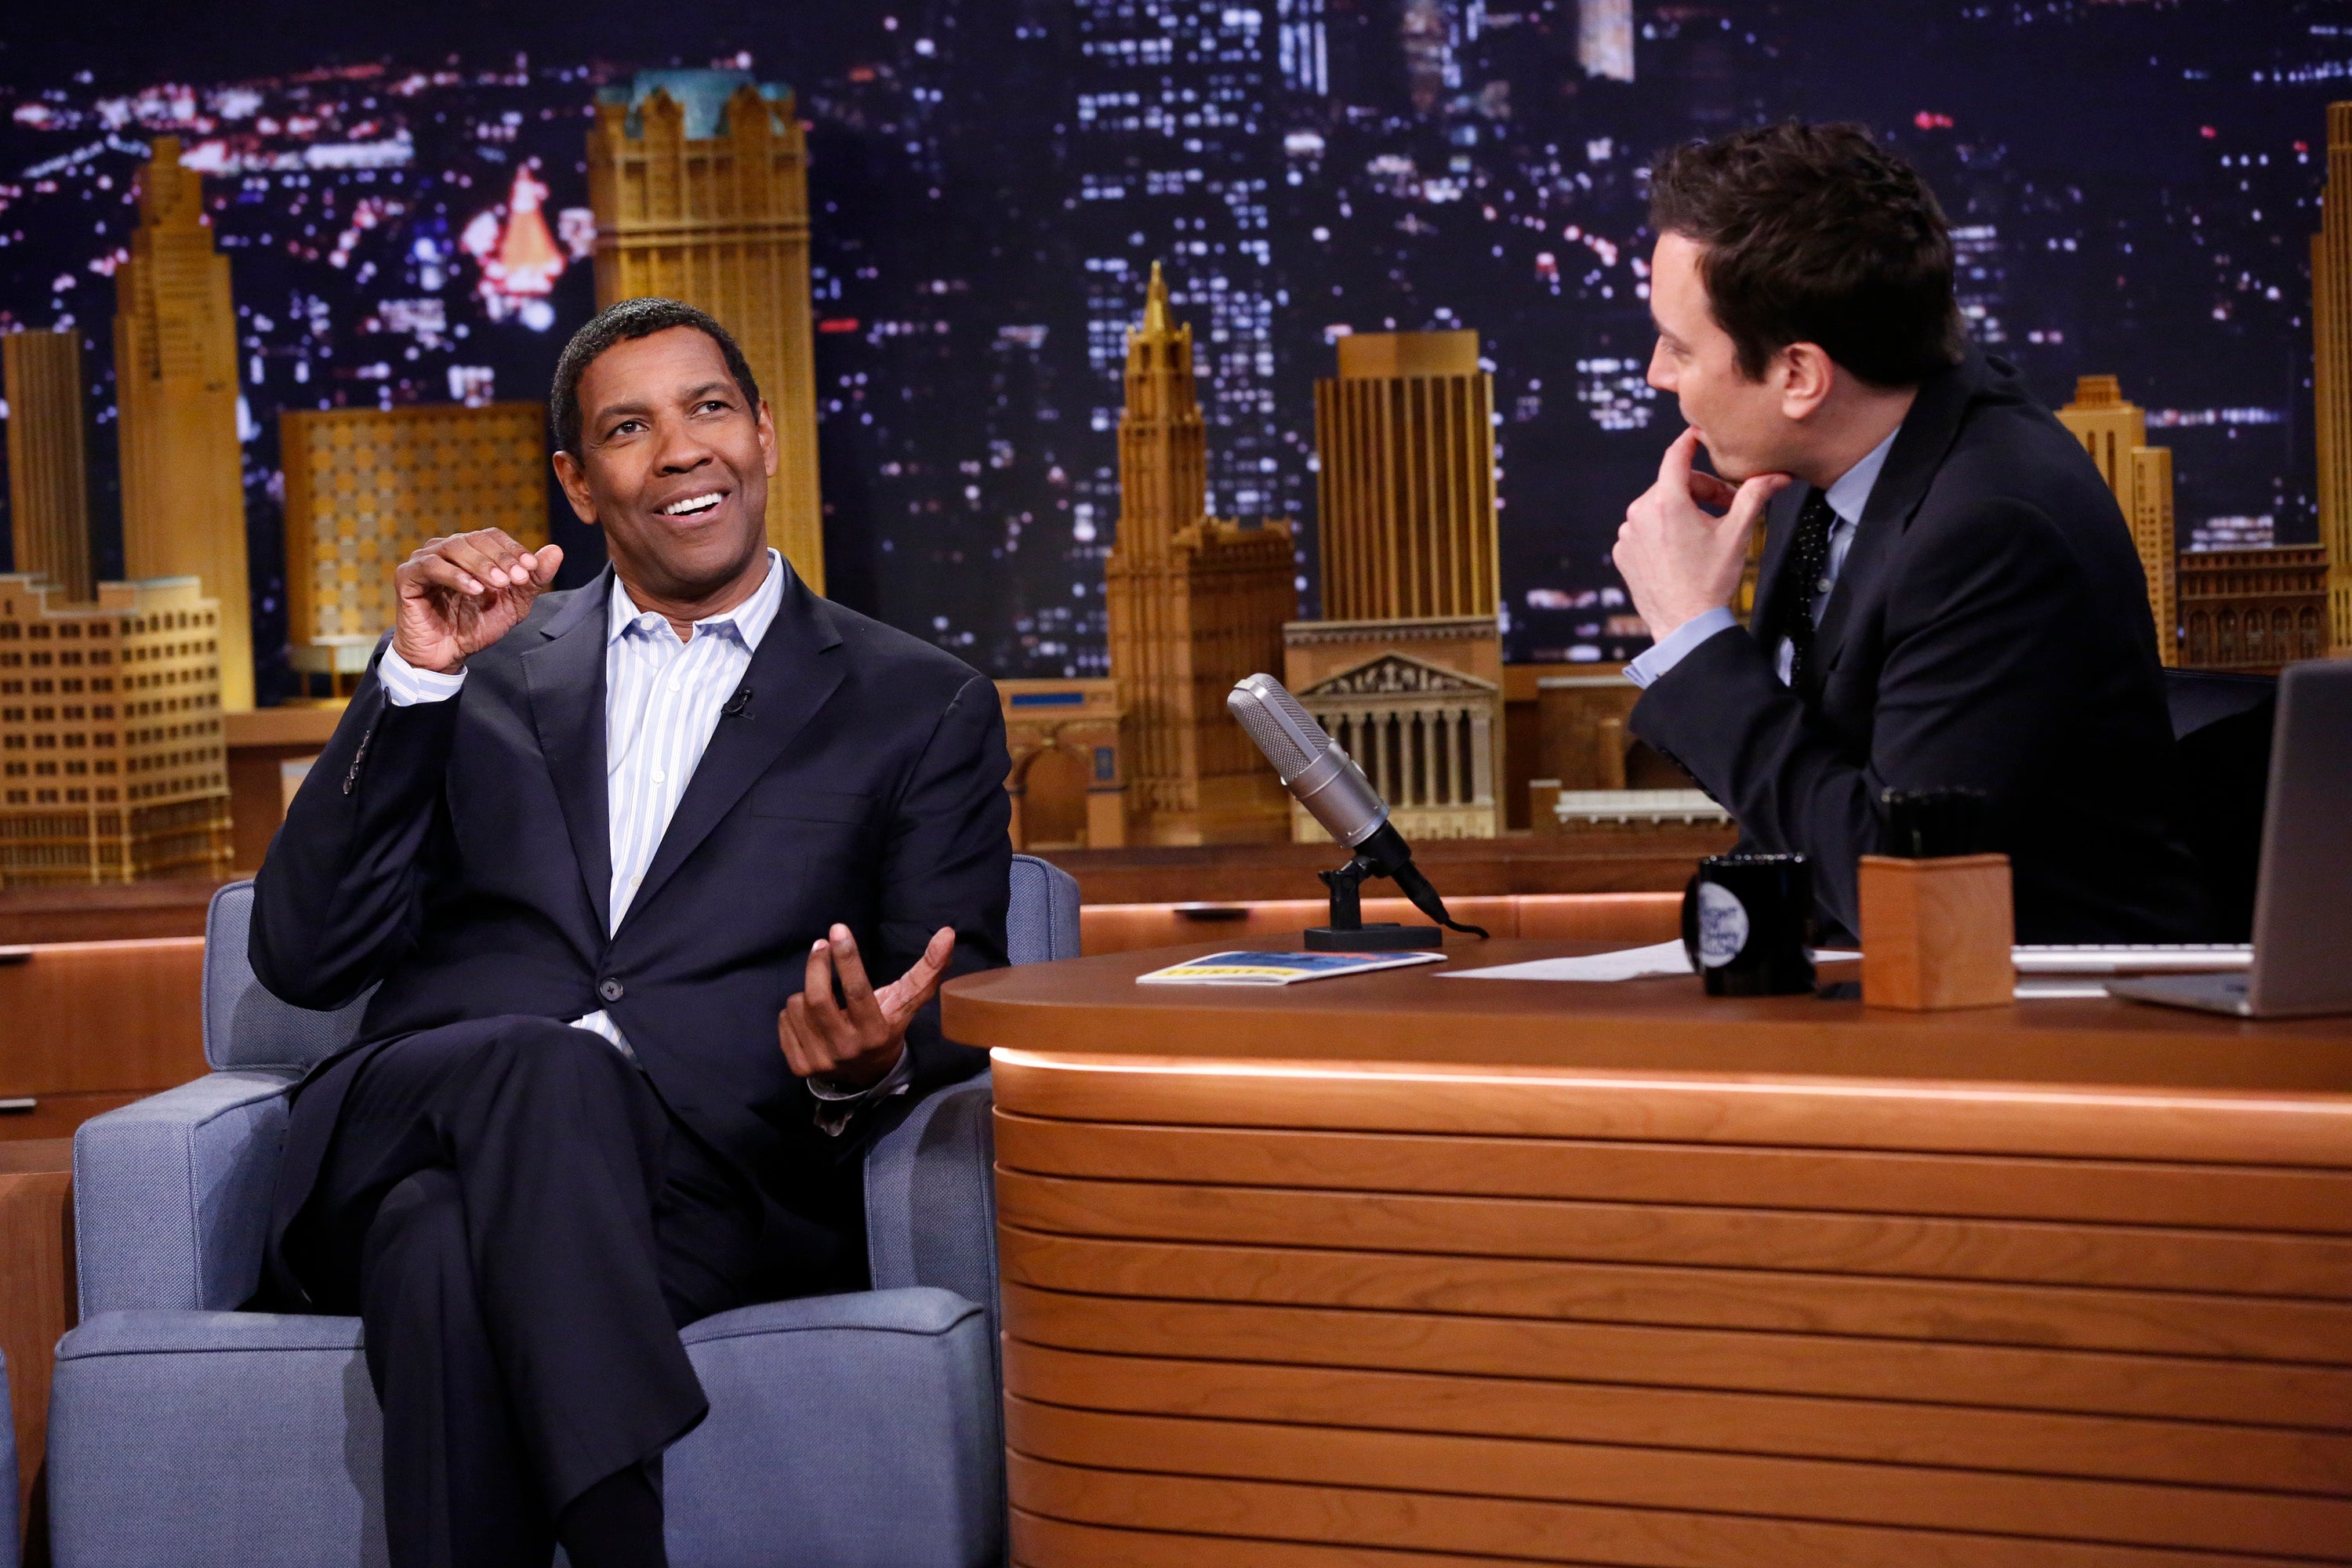 Denzel Washington Dramatically Reading Greeting Cards Is The Only Thing You Need To See Today